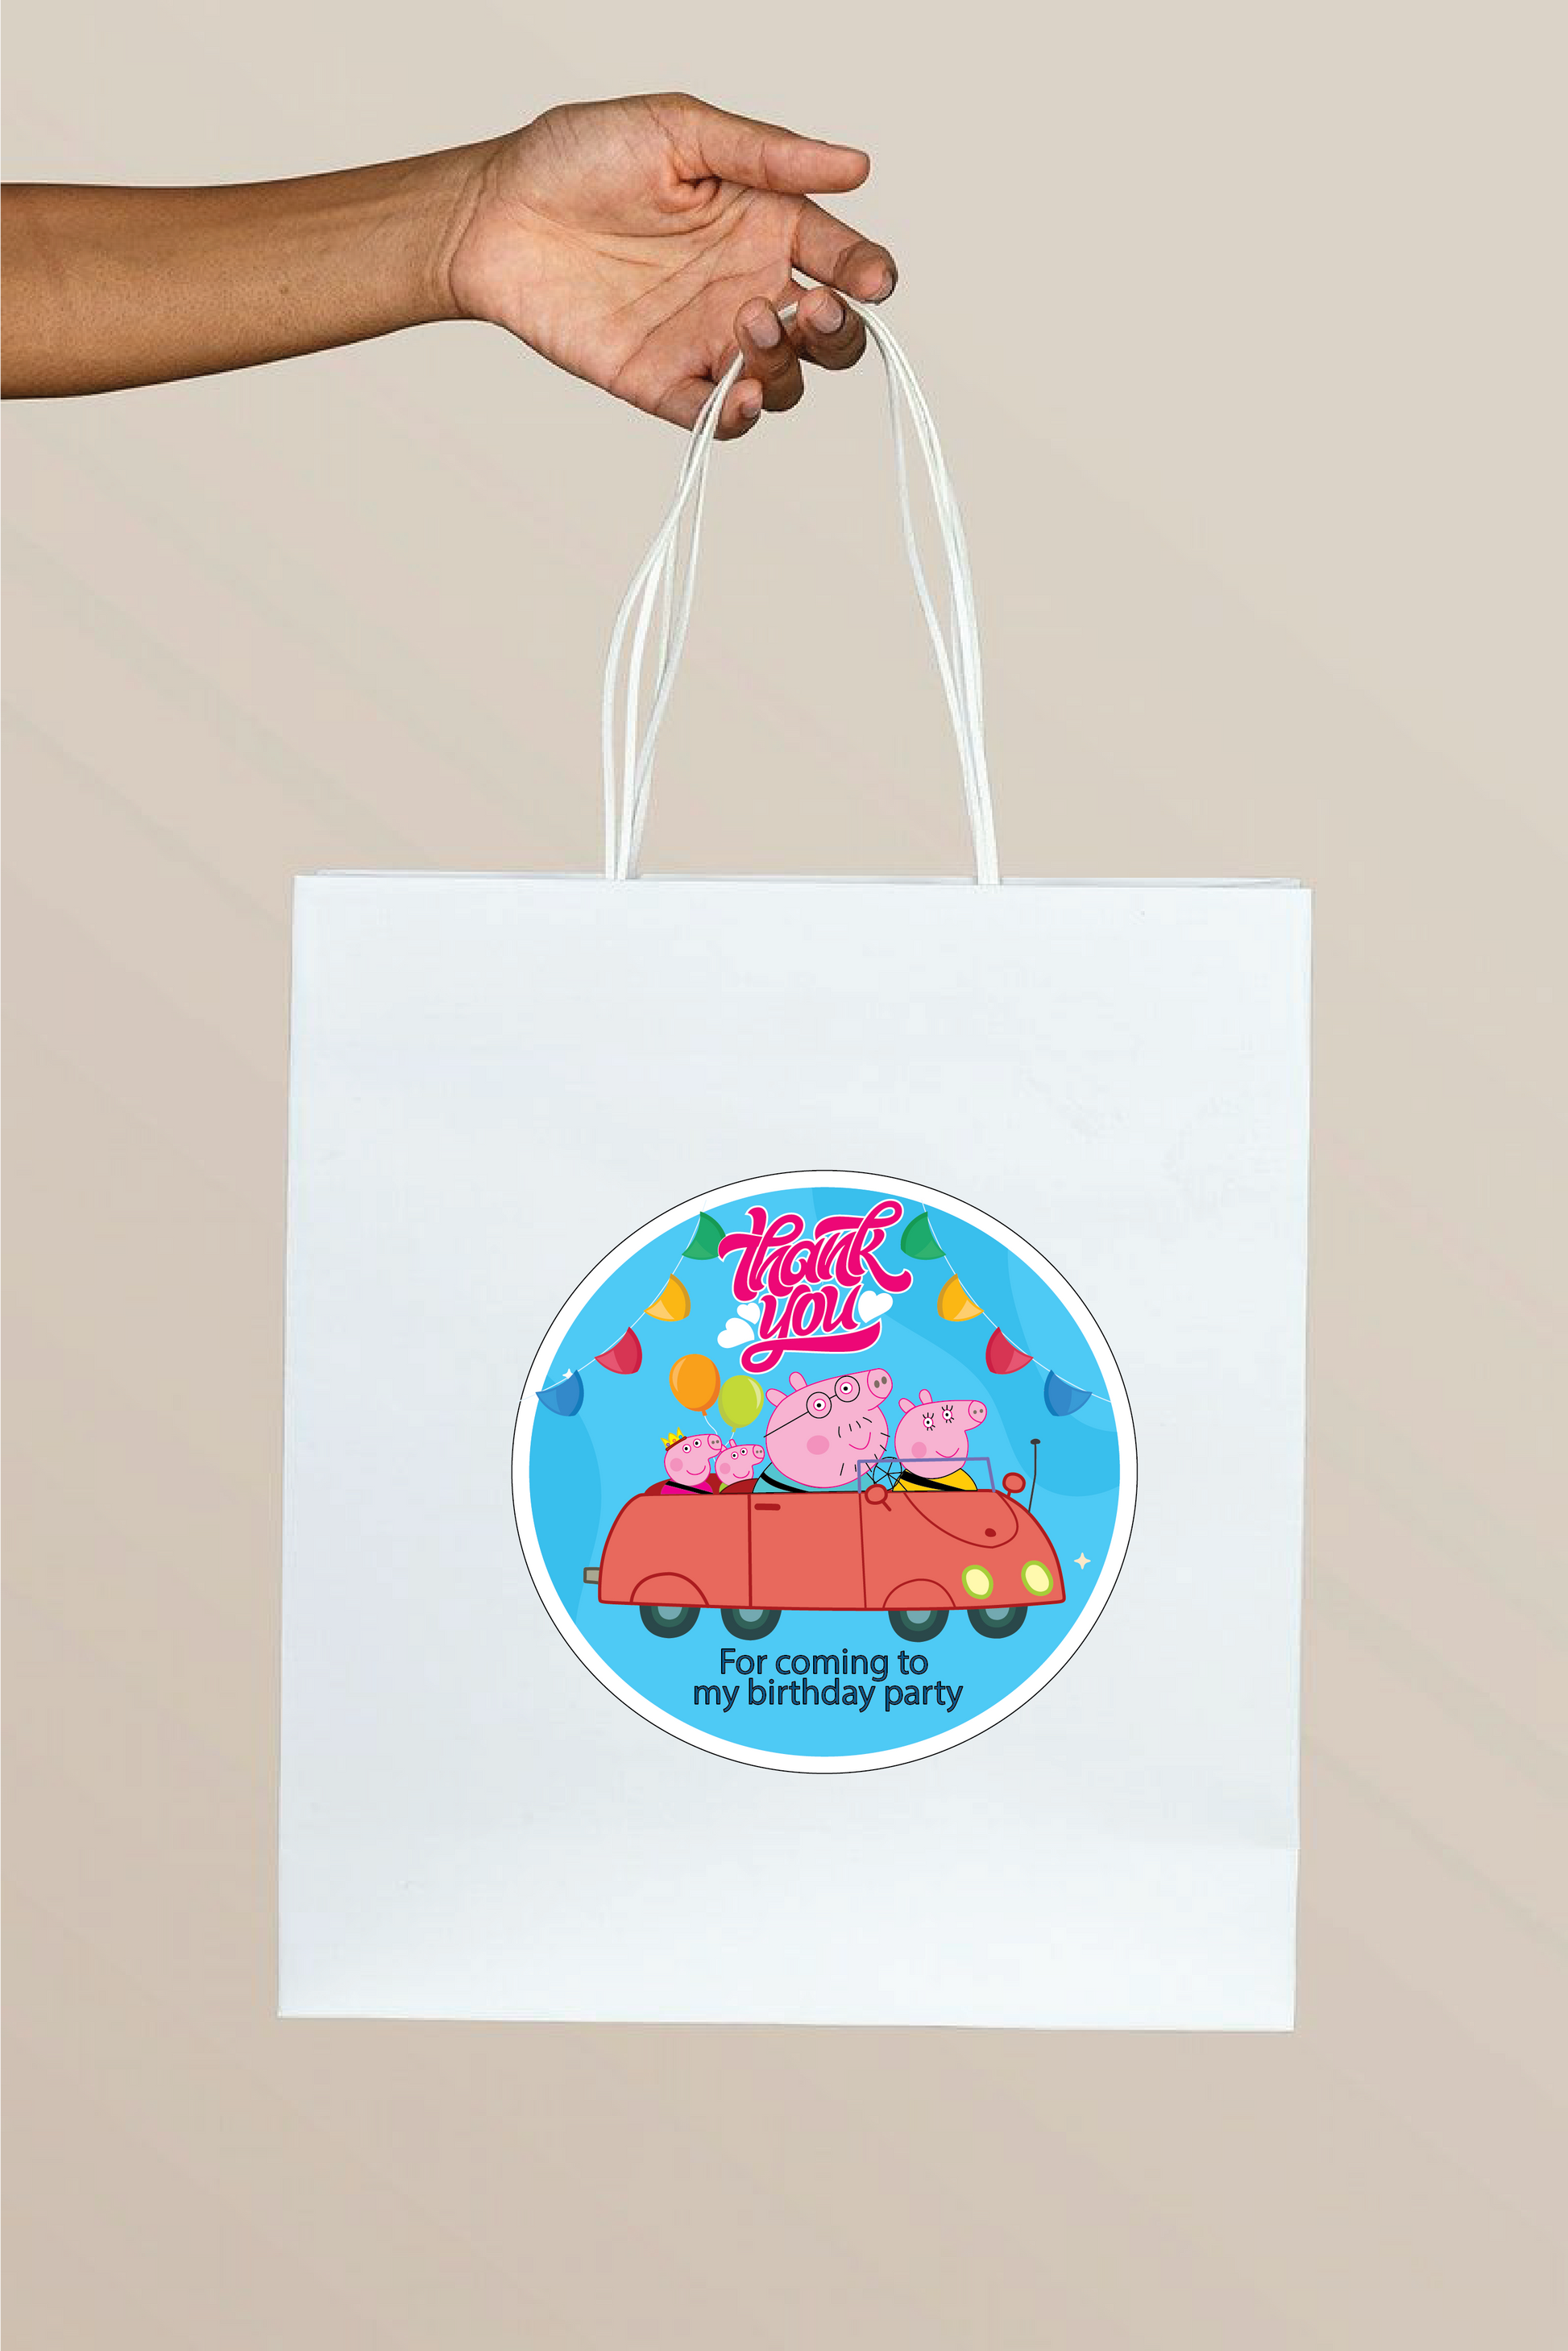 Return Gift Bags for Birthday Party - Peppa Pig Theme - Option 1